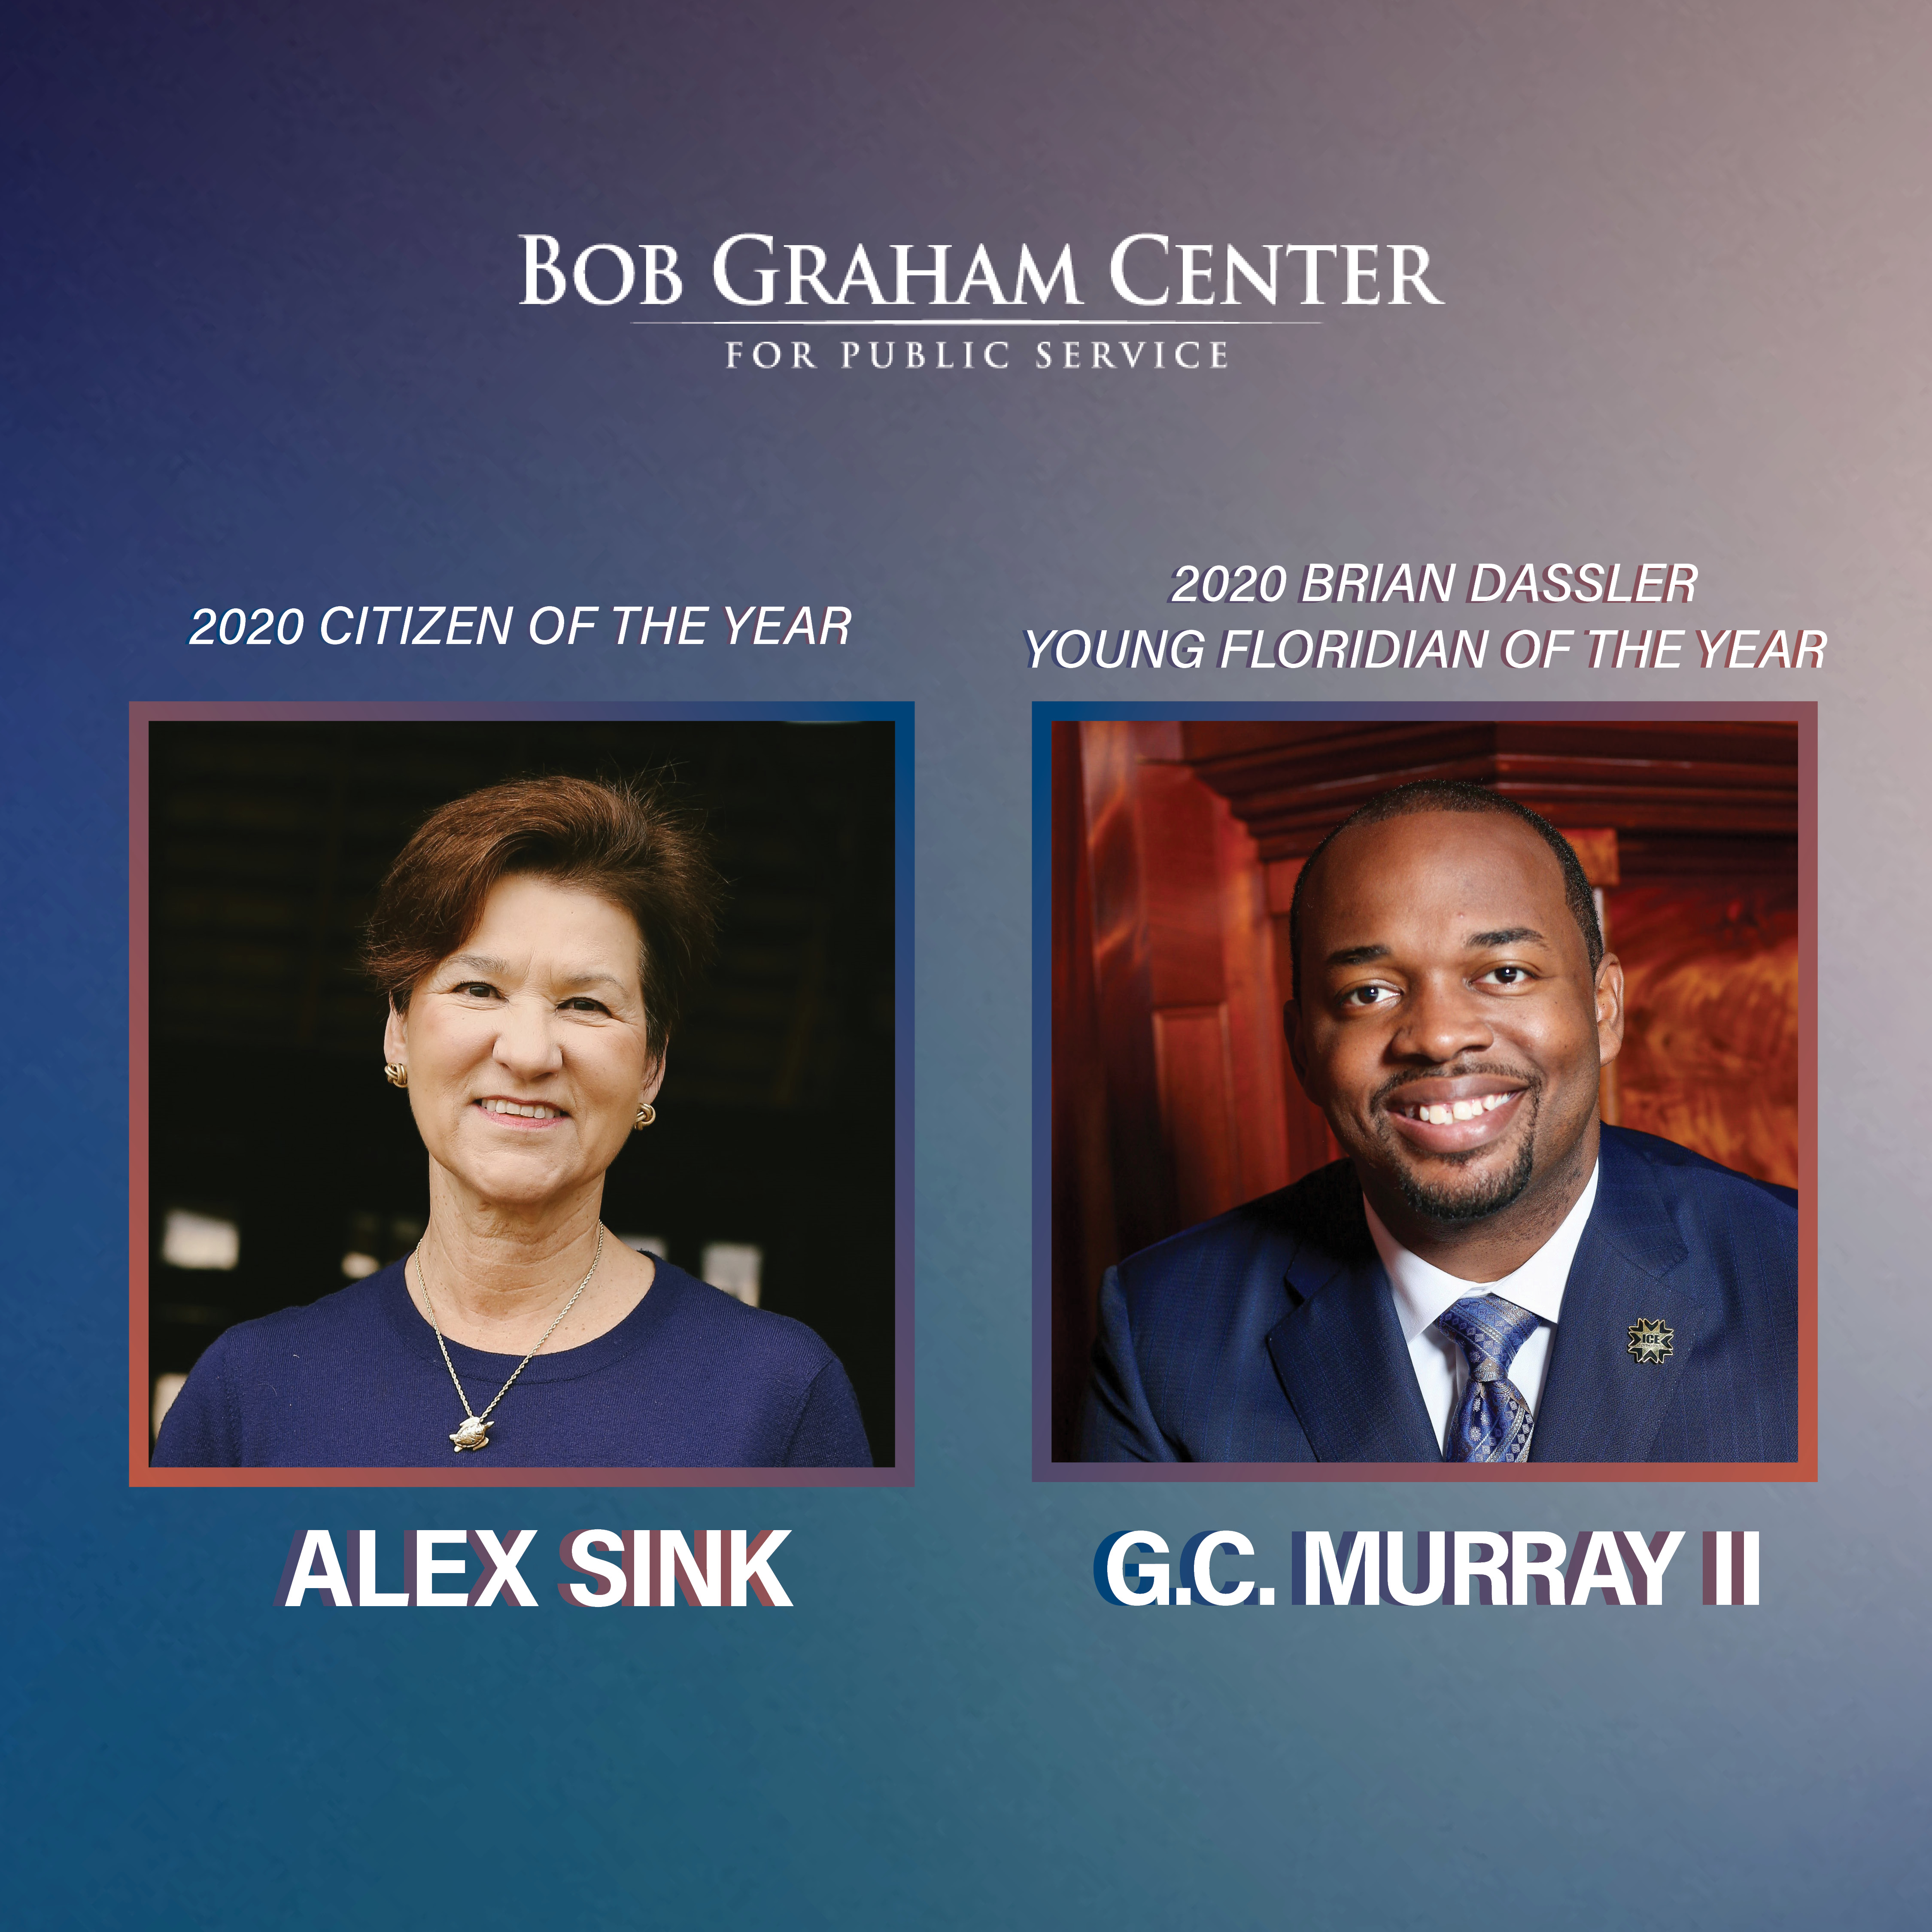 alex sink and gc murray to receive awards